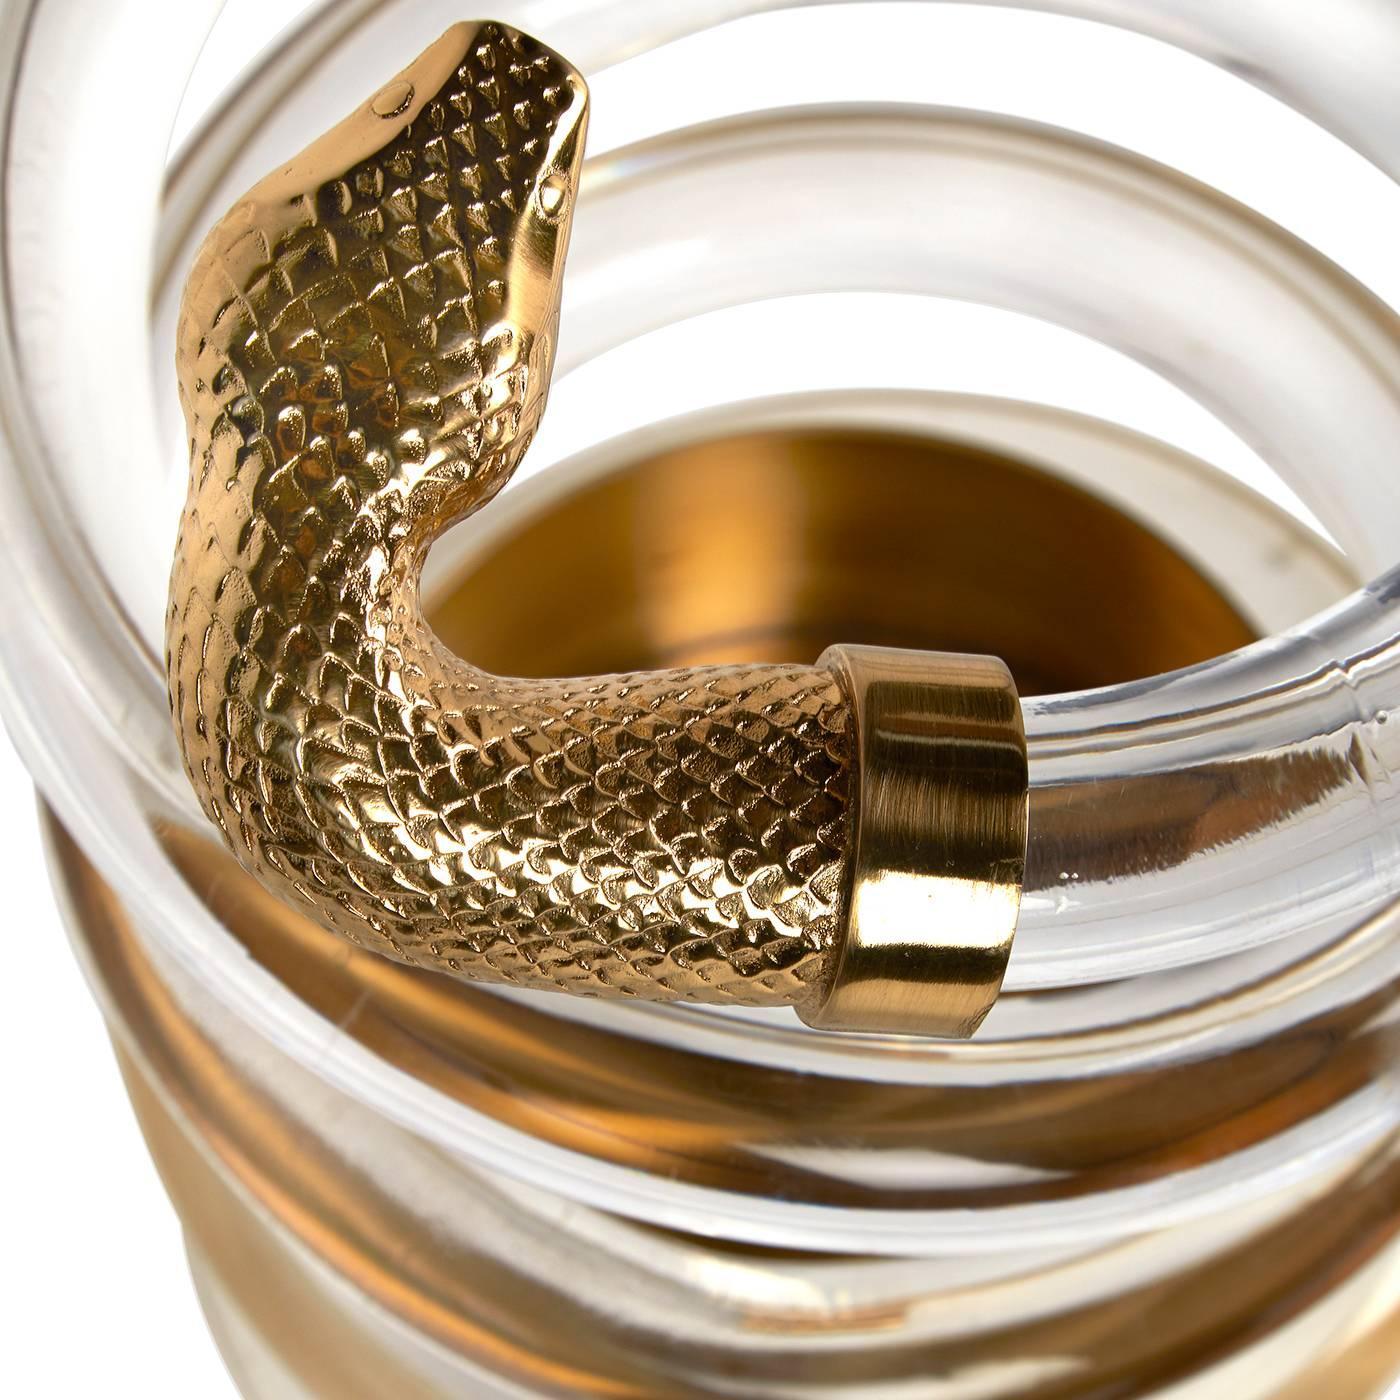 Reptilian receptacle. Twinkly acrylic coils weightlessly from a solid brass base and is capped with a brass serpent head ready to strike. Edgy glamour meets serpentine undulation for the ultimate in umbrella sophistication. The original reptilian